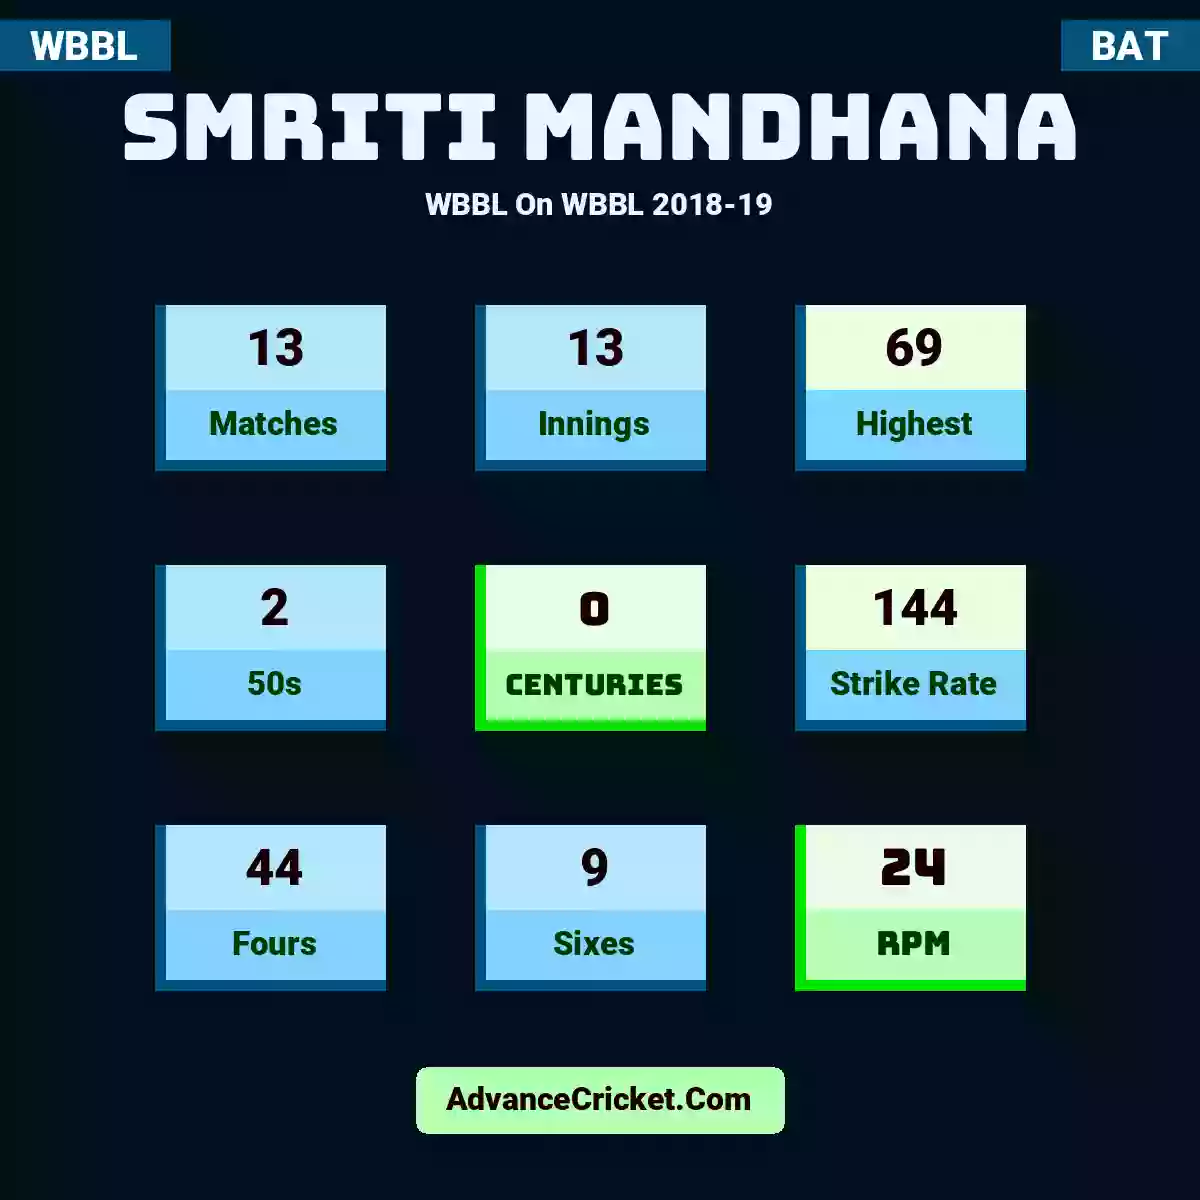 Smriti Mandhana WBBL  On WBBL 2018-19, Smriti Mandhana played 13 matches, scored 69 runs as highest, 2 half-centuries, and 0 centuries, with a strike rate of 144. S.Mandhana hit 44 fours and 9 sixes, with an RPM of 24.